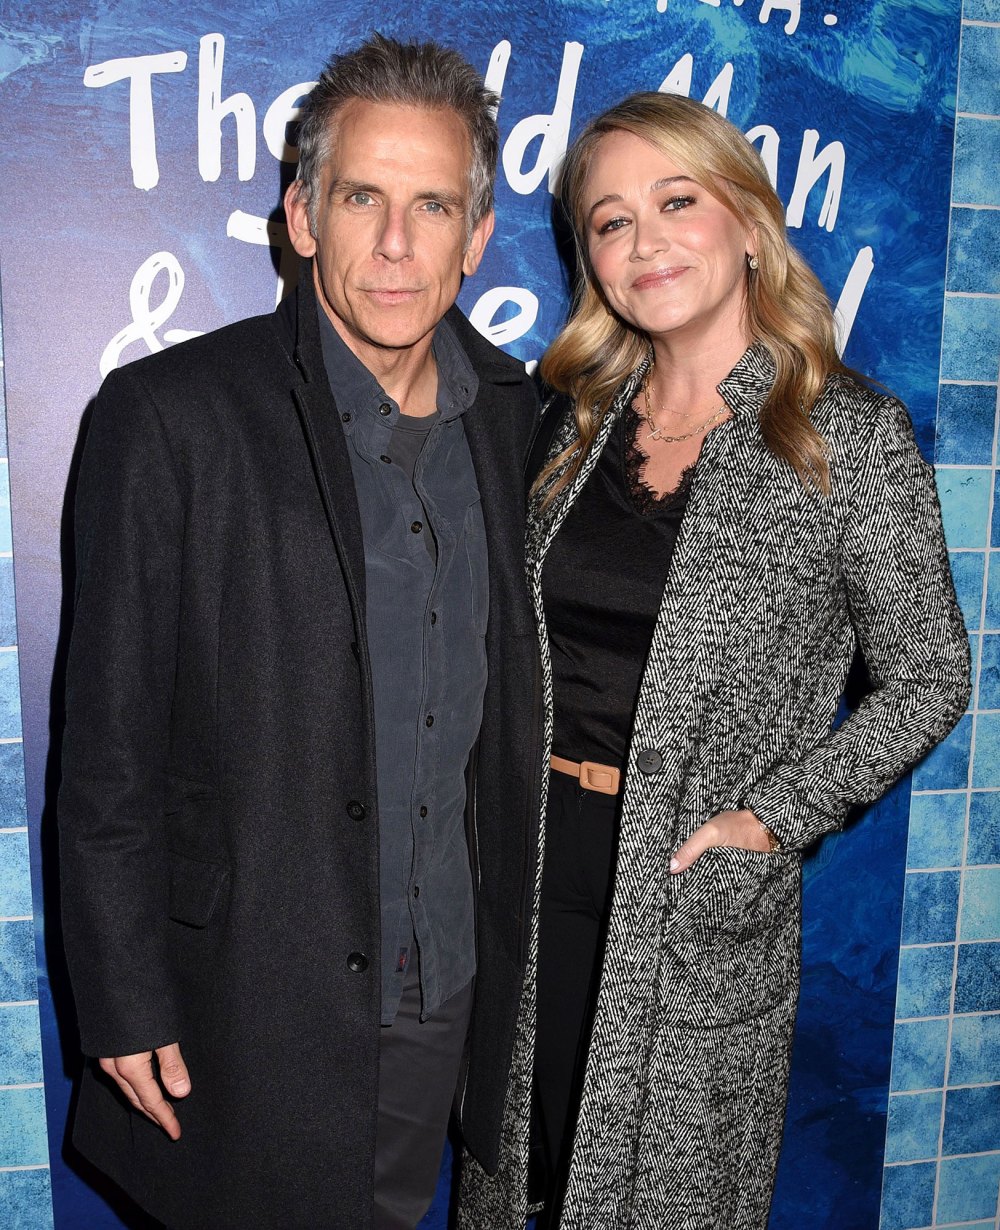 Christine Taylor Says Husband Ben Stiller Gifted Her Hey Dude DVDs as a Birthday Present